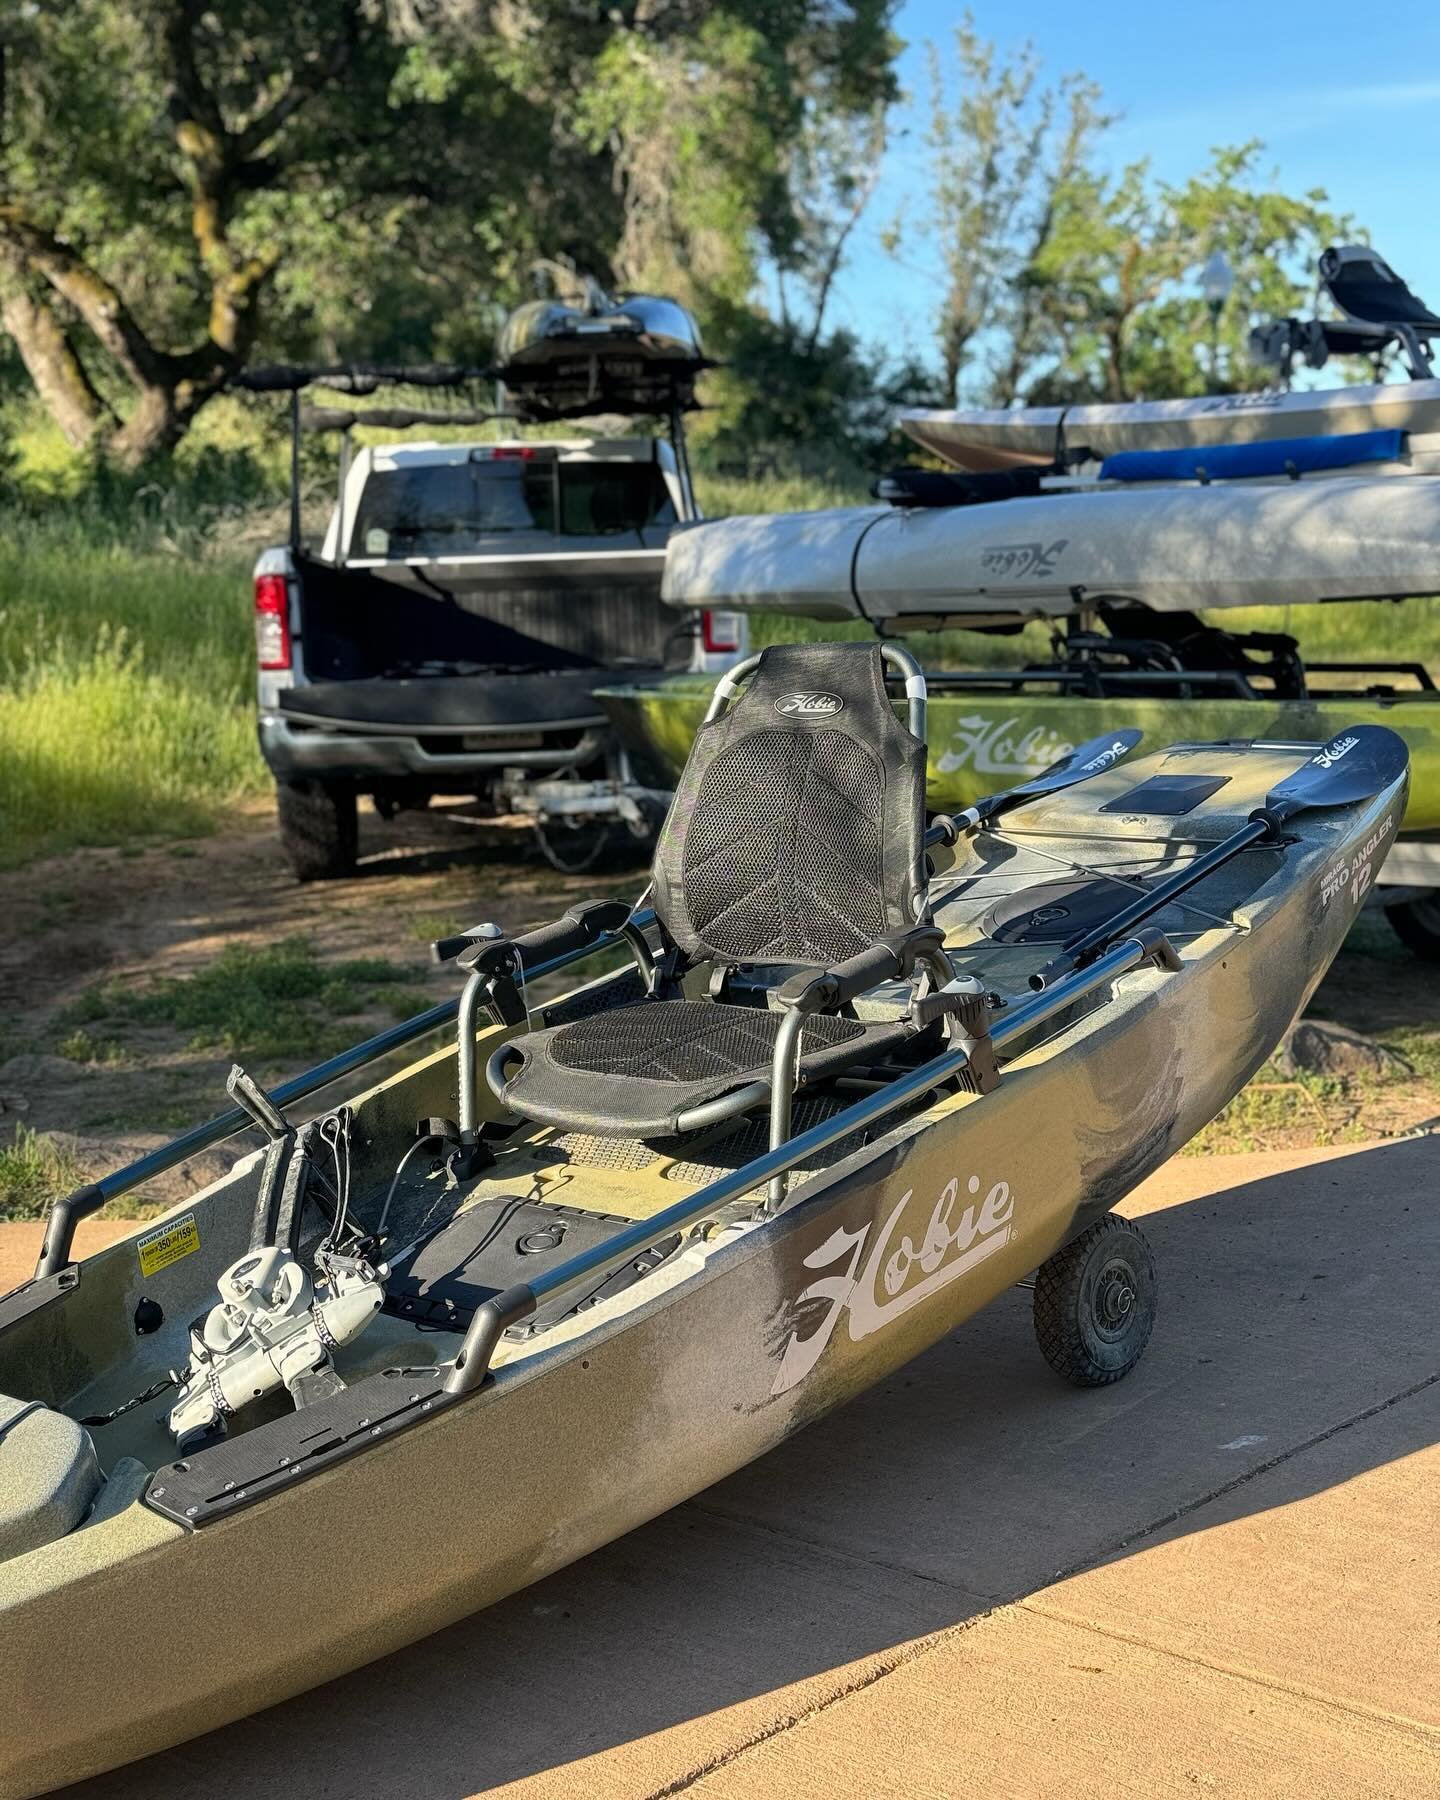 Demo season is here! We offer demo&rsquo;s every Saturday morning from 8 to 10. Give the shop a call to get out on the water to try your next ride. (707)-542-7245

#hobie #hobiekayak #kayaking #kayakdemo #kayakdemodays #kayakfishing #kayak #getoutsid